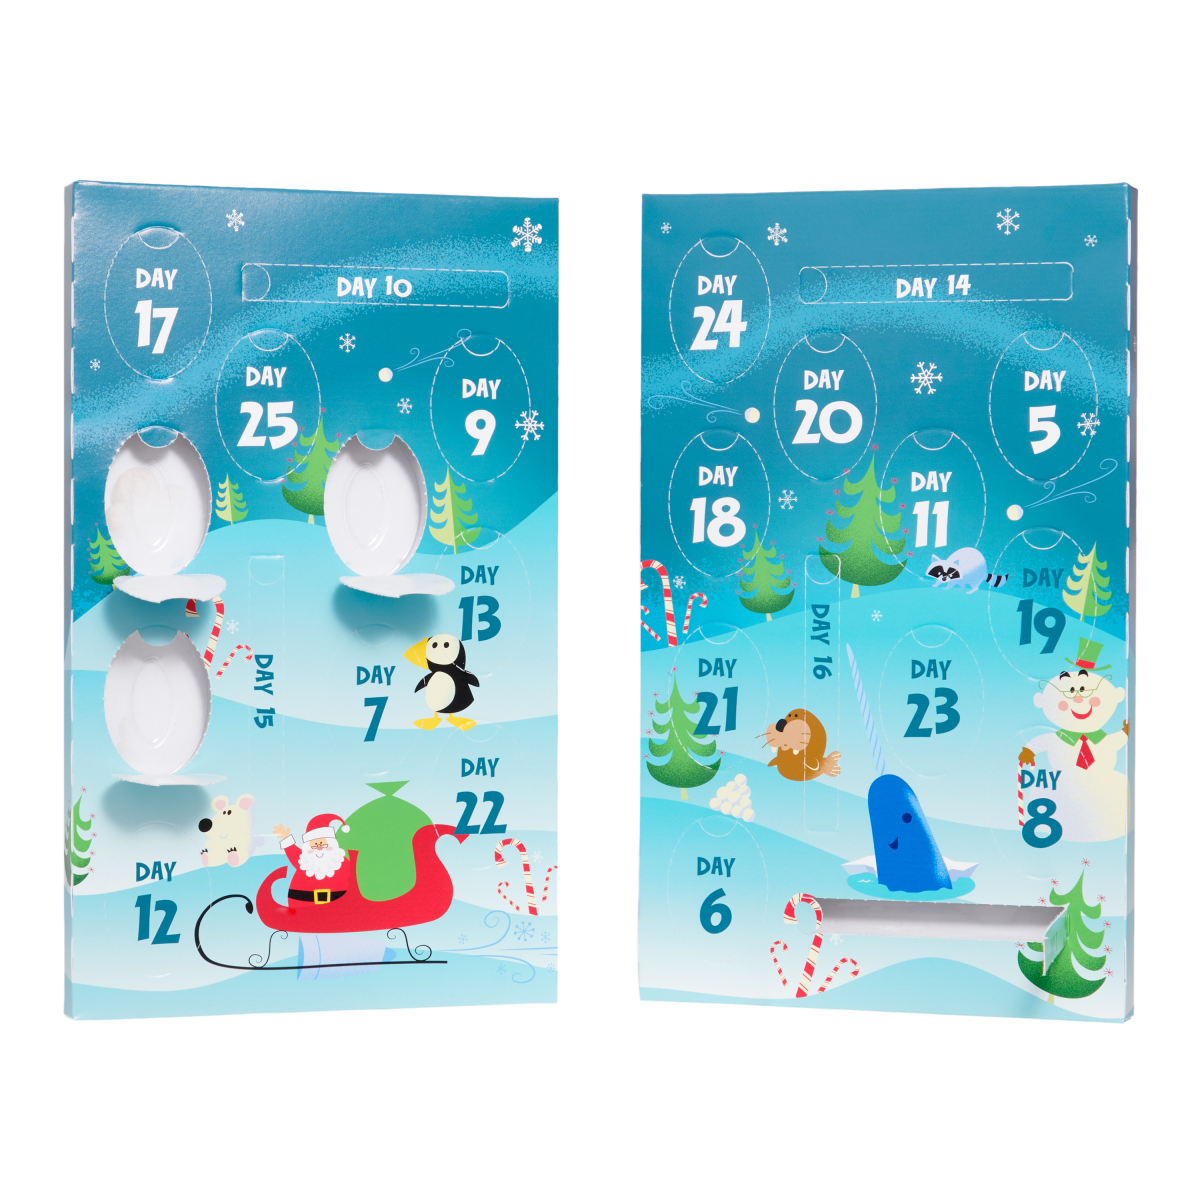 Festive Advent Calendar From #39 BarkBox #39 Is the Perfect Holiday Treat for